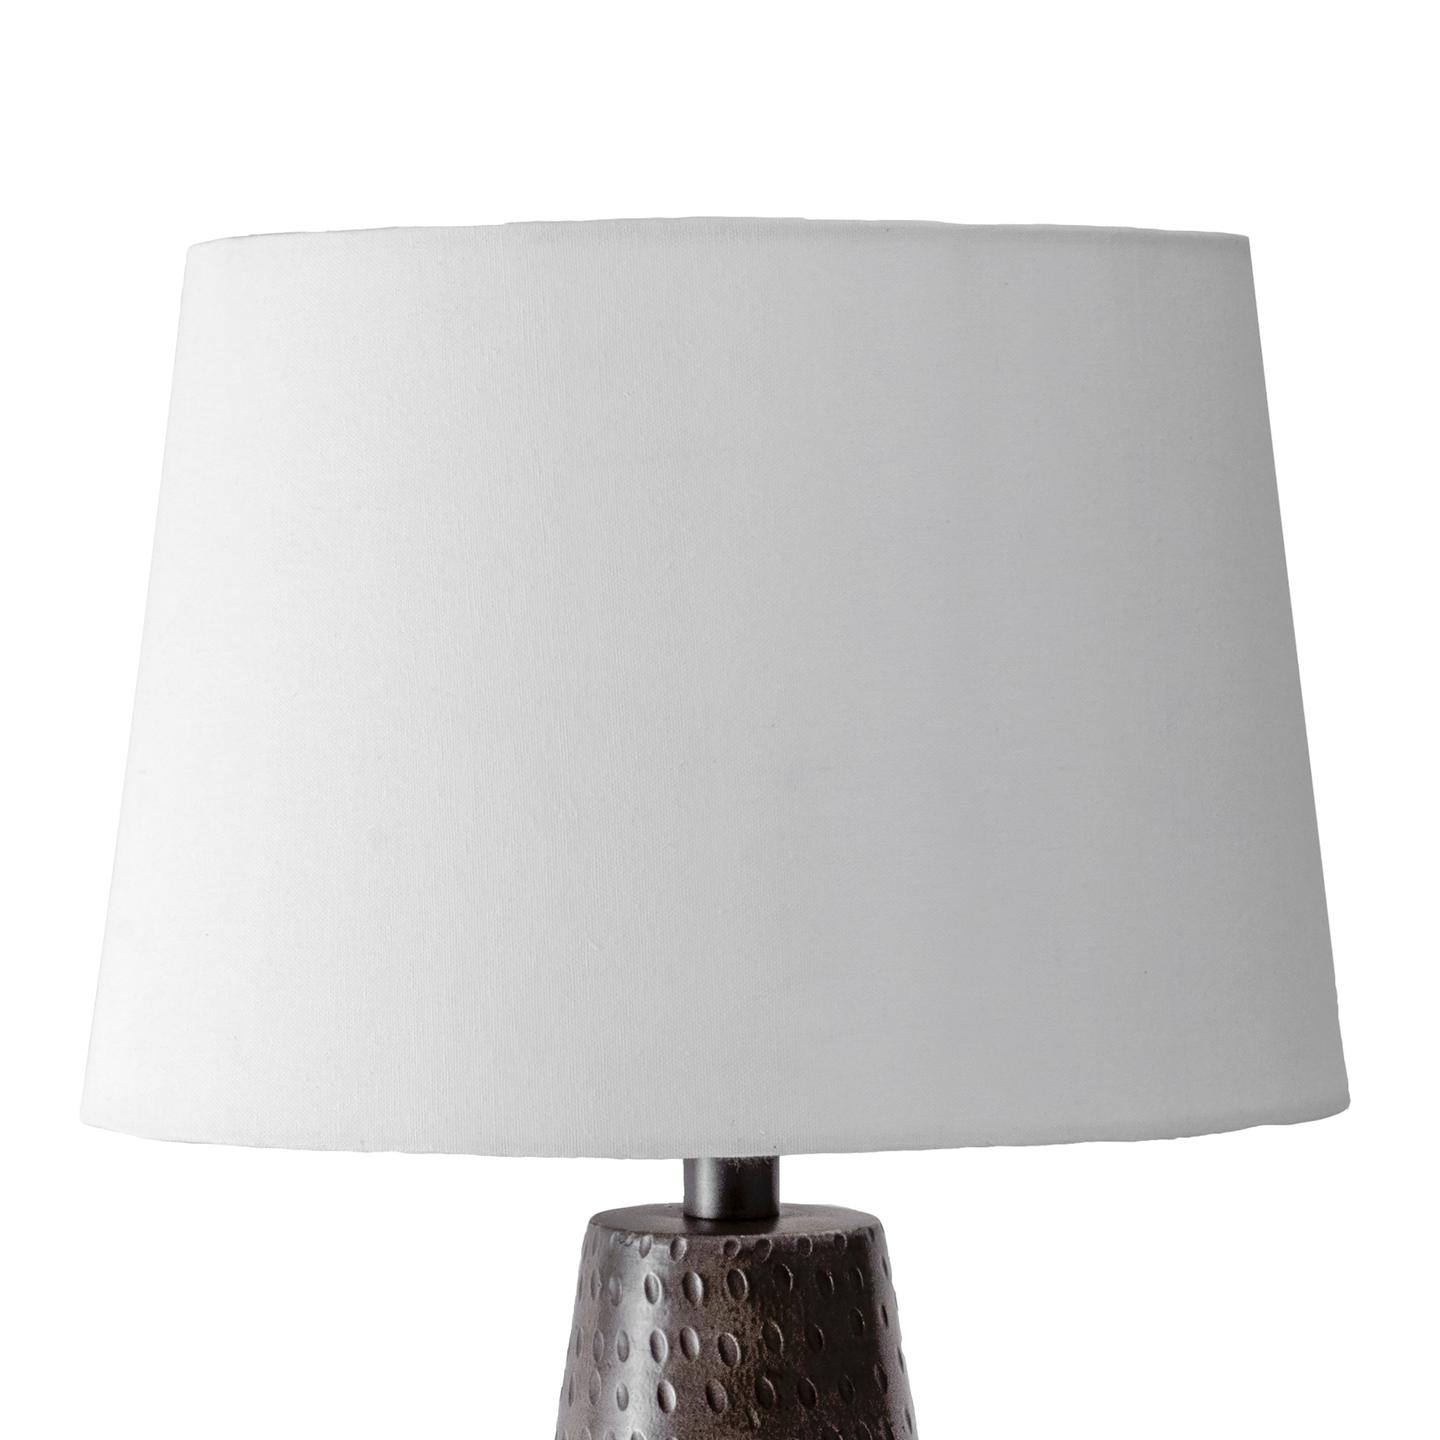 Chico 22" Terracotta Table Lamp - Image 4